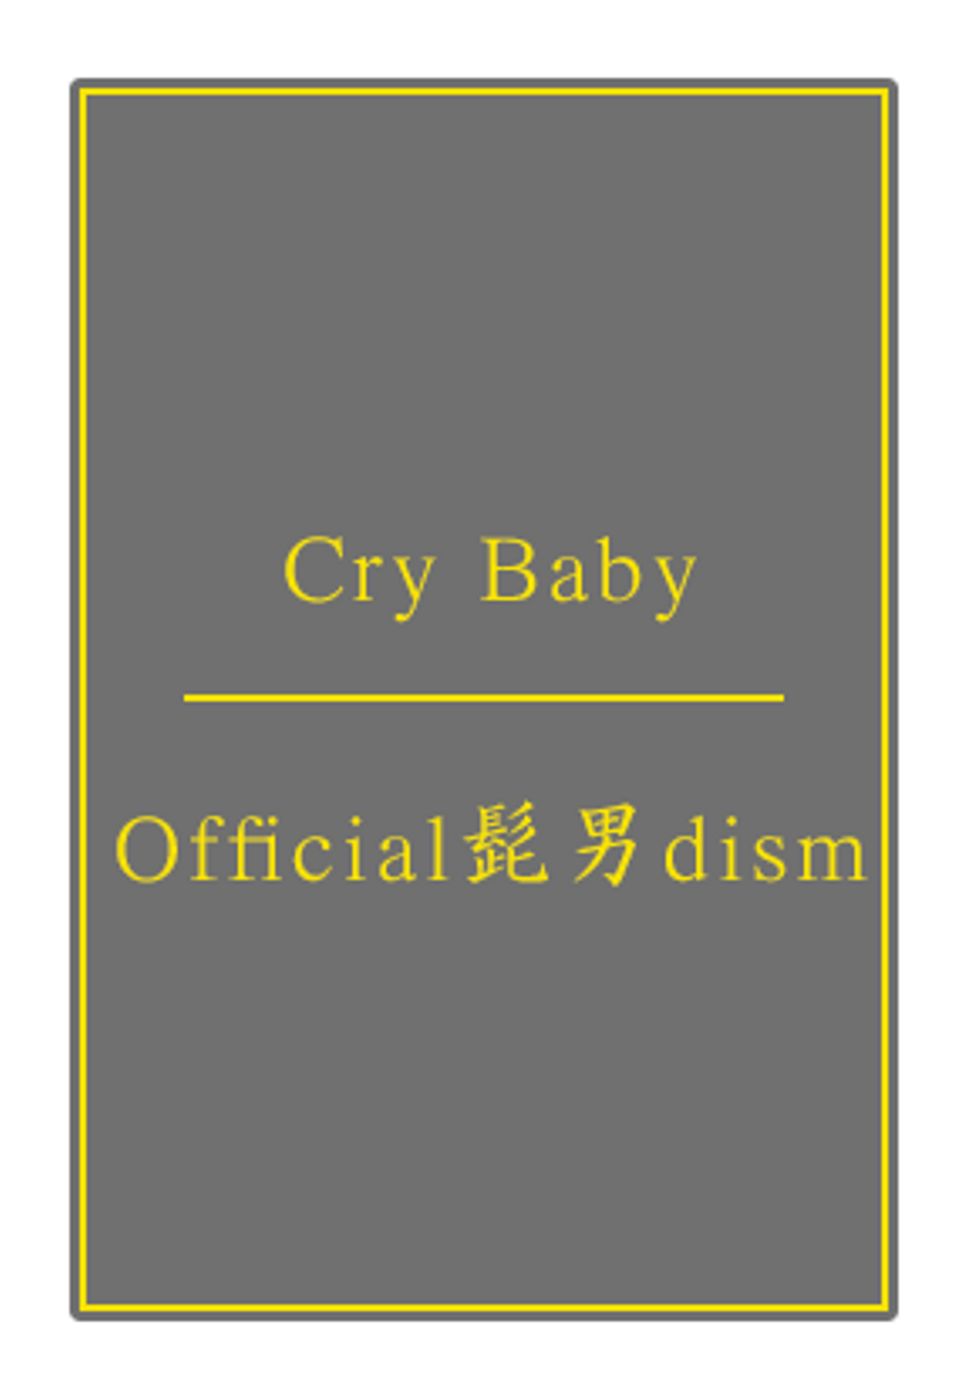 Official髭男dism - Cry Baby (『東京リベンジャーズ 』OPテーマ) by DSU